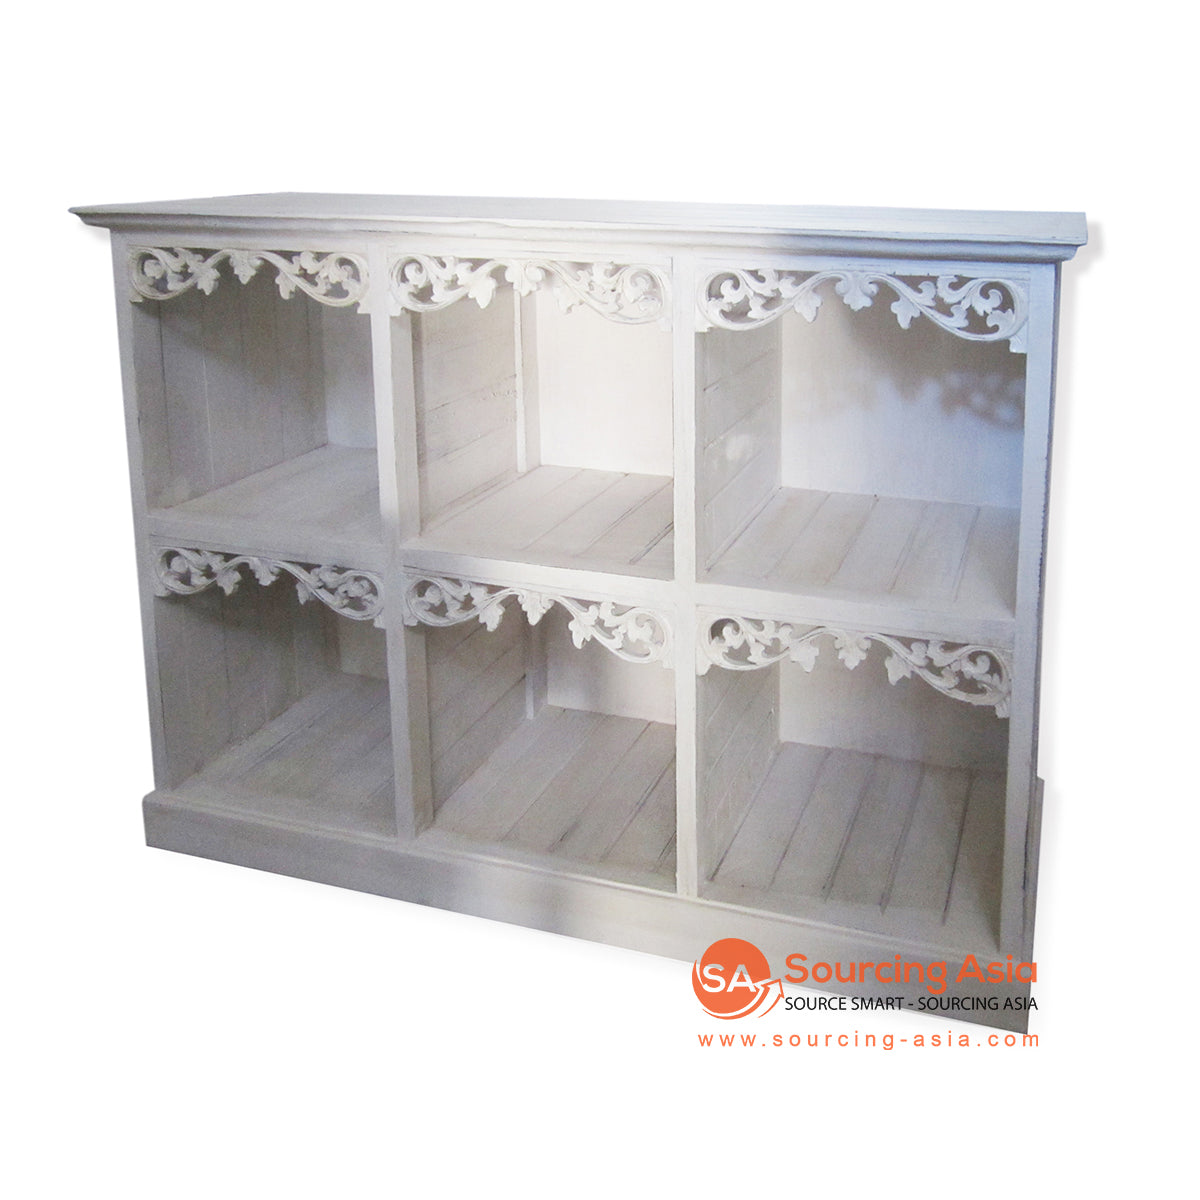 THE134WW WHITE WASH WOODEN BUFFET WITH SIX SHELVES AND CARVING